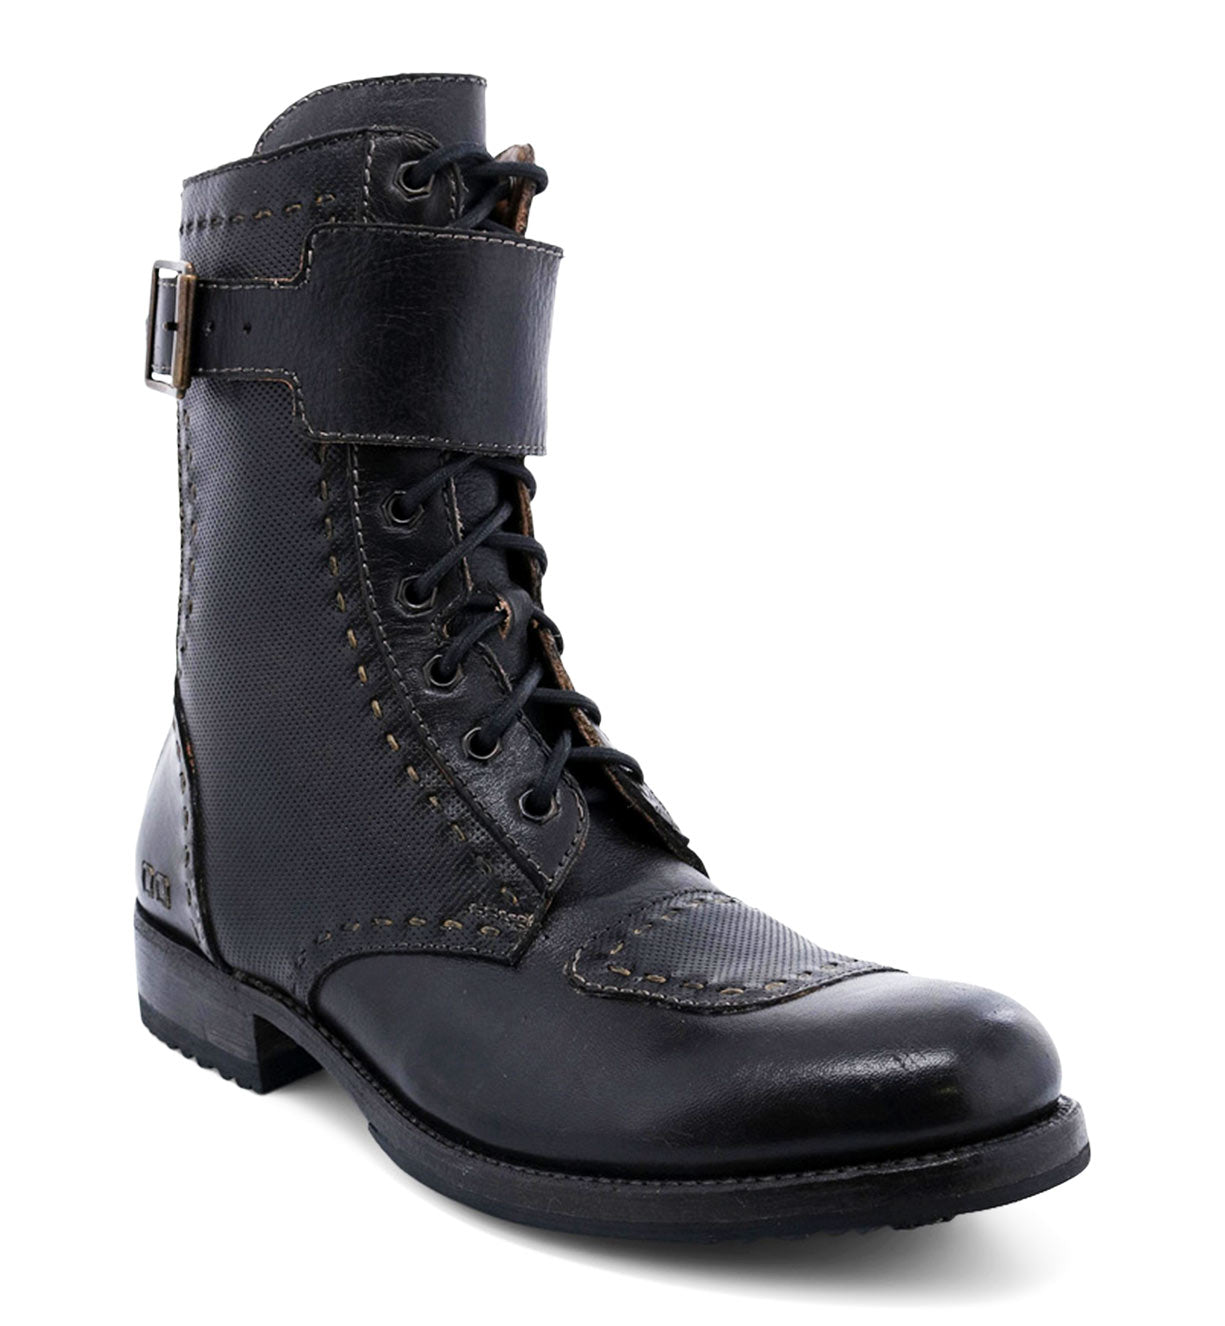 Black Bed Stu Walker vegetable tanned leather combat boot with laces and a buckle at the top, isolated on a white background.